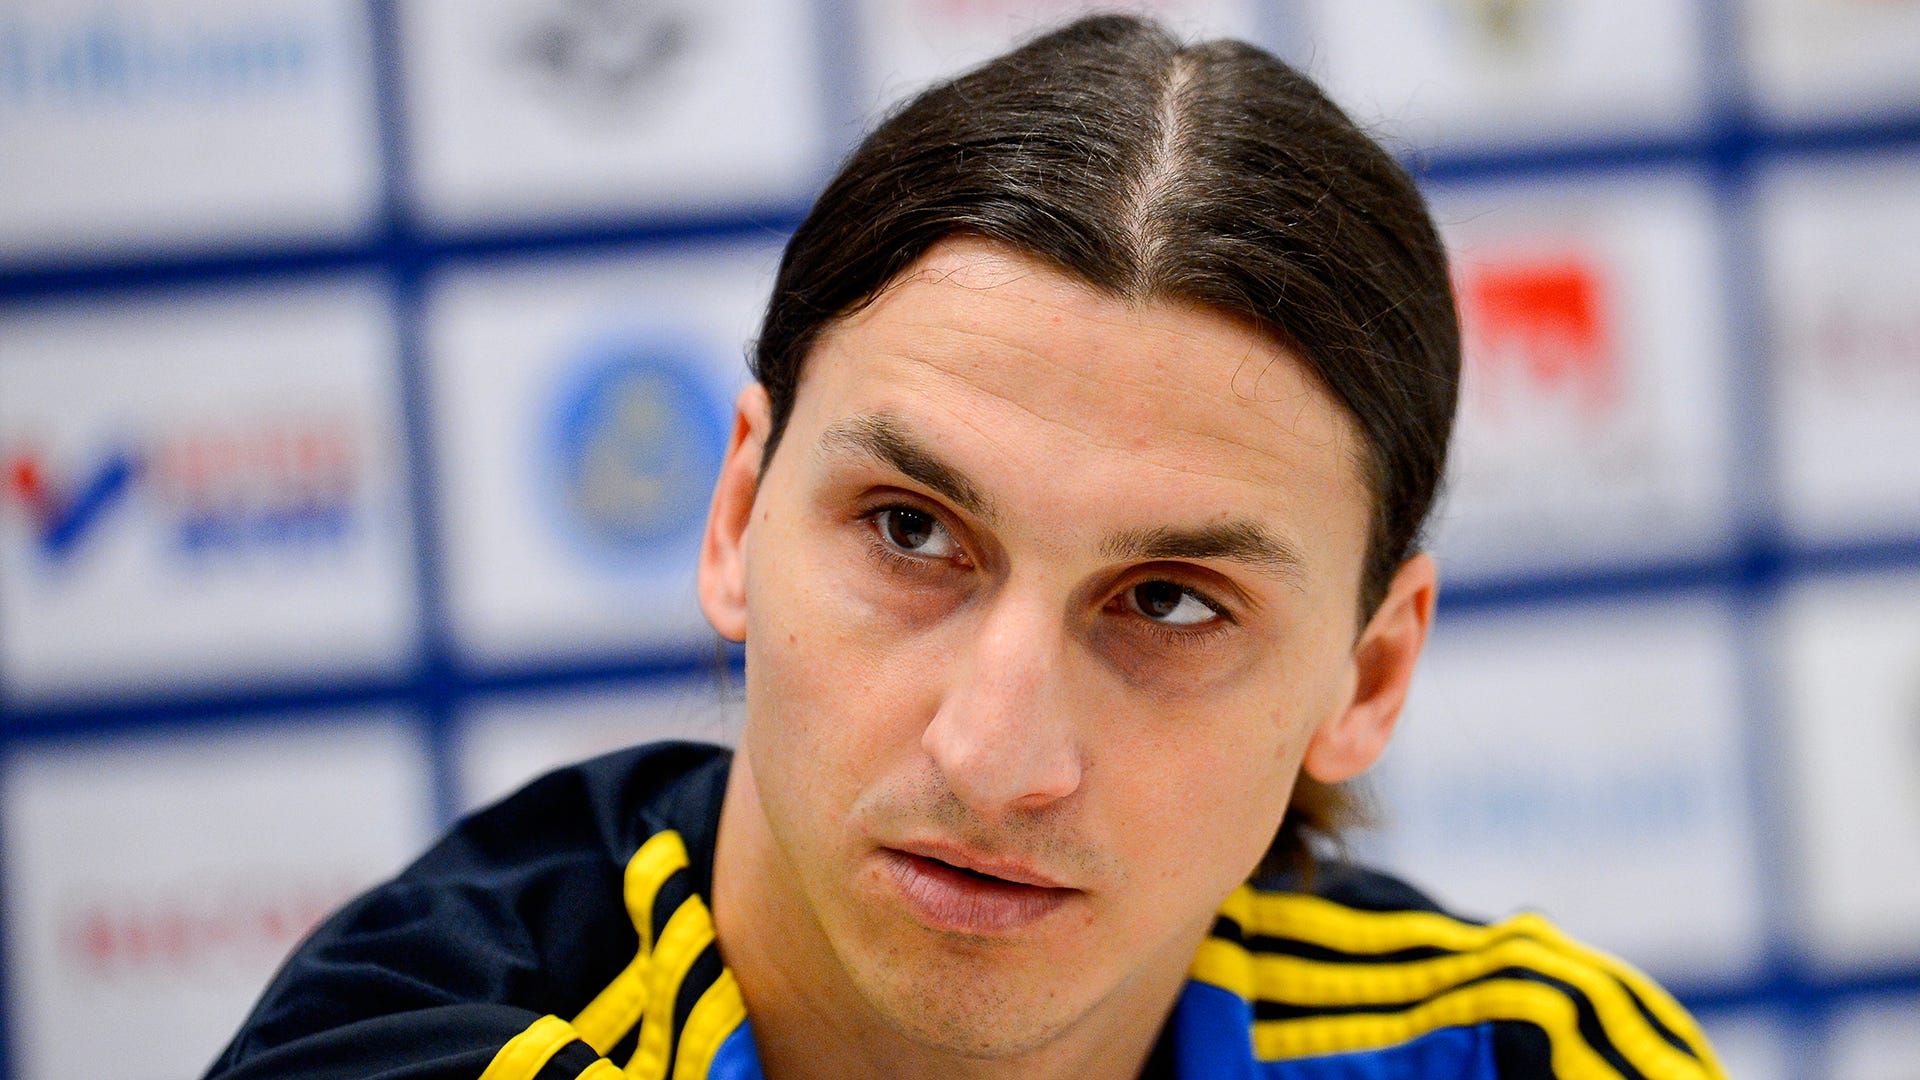 From the Arsenal 'audition' to Guardiola's 'bullsh*t' - Zlatan Ibrahimovic's  most colourful and controversial quotes  Singapore